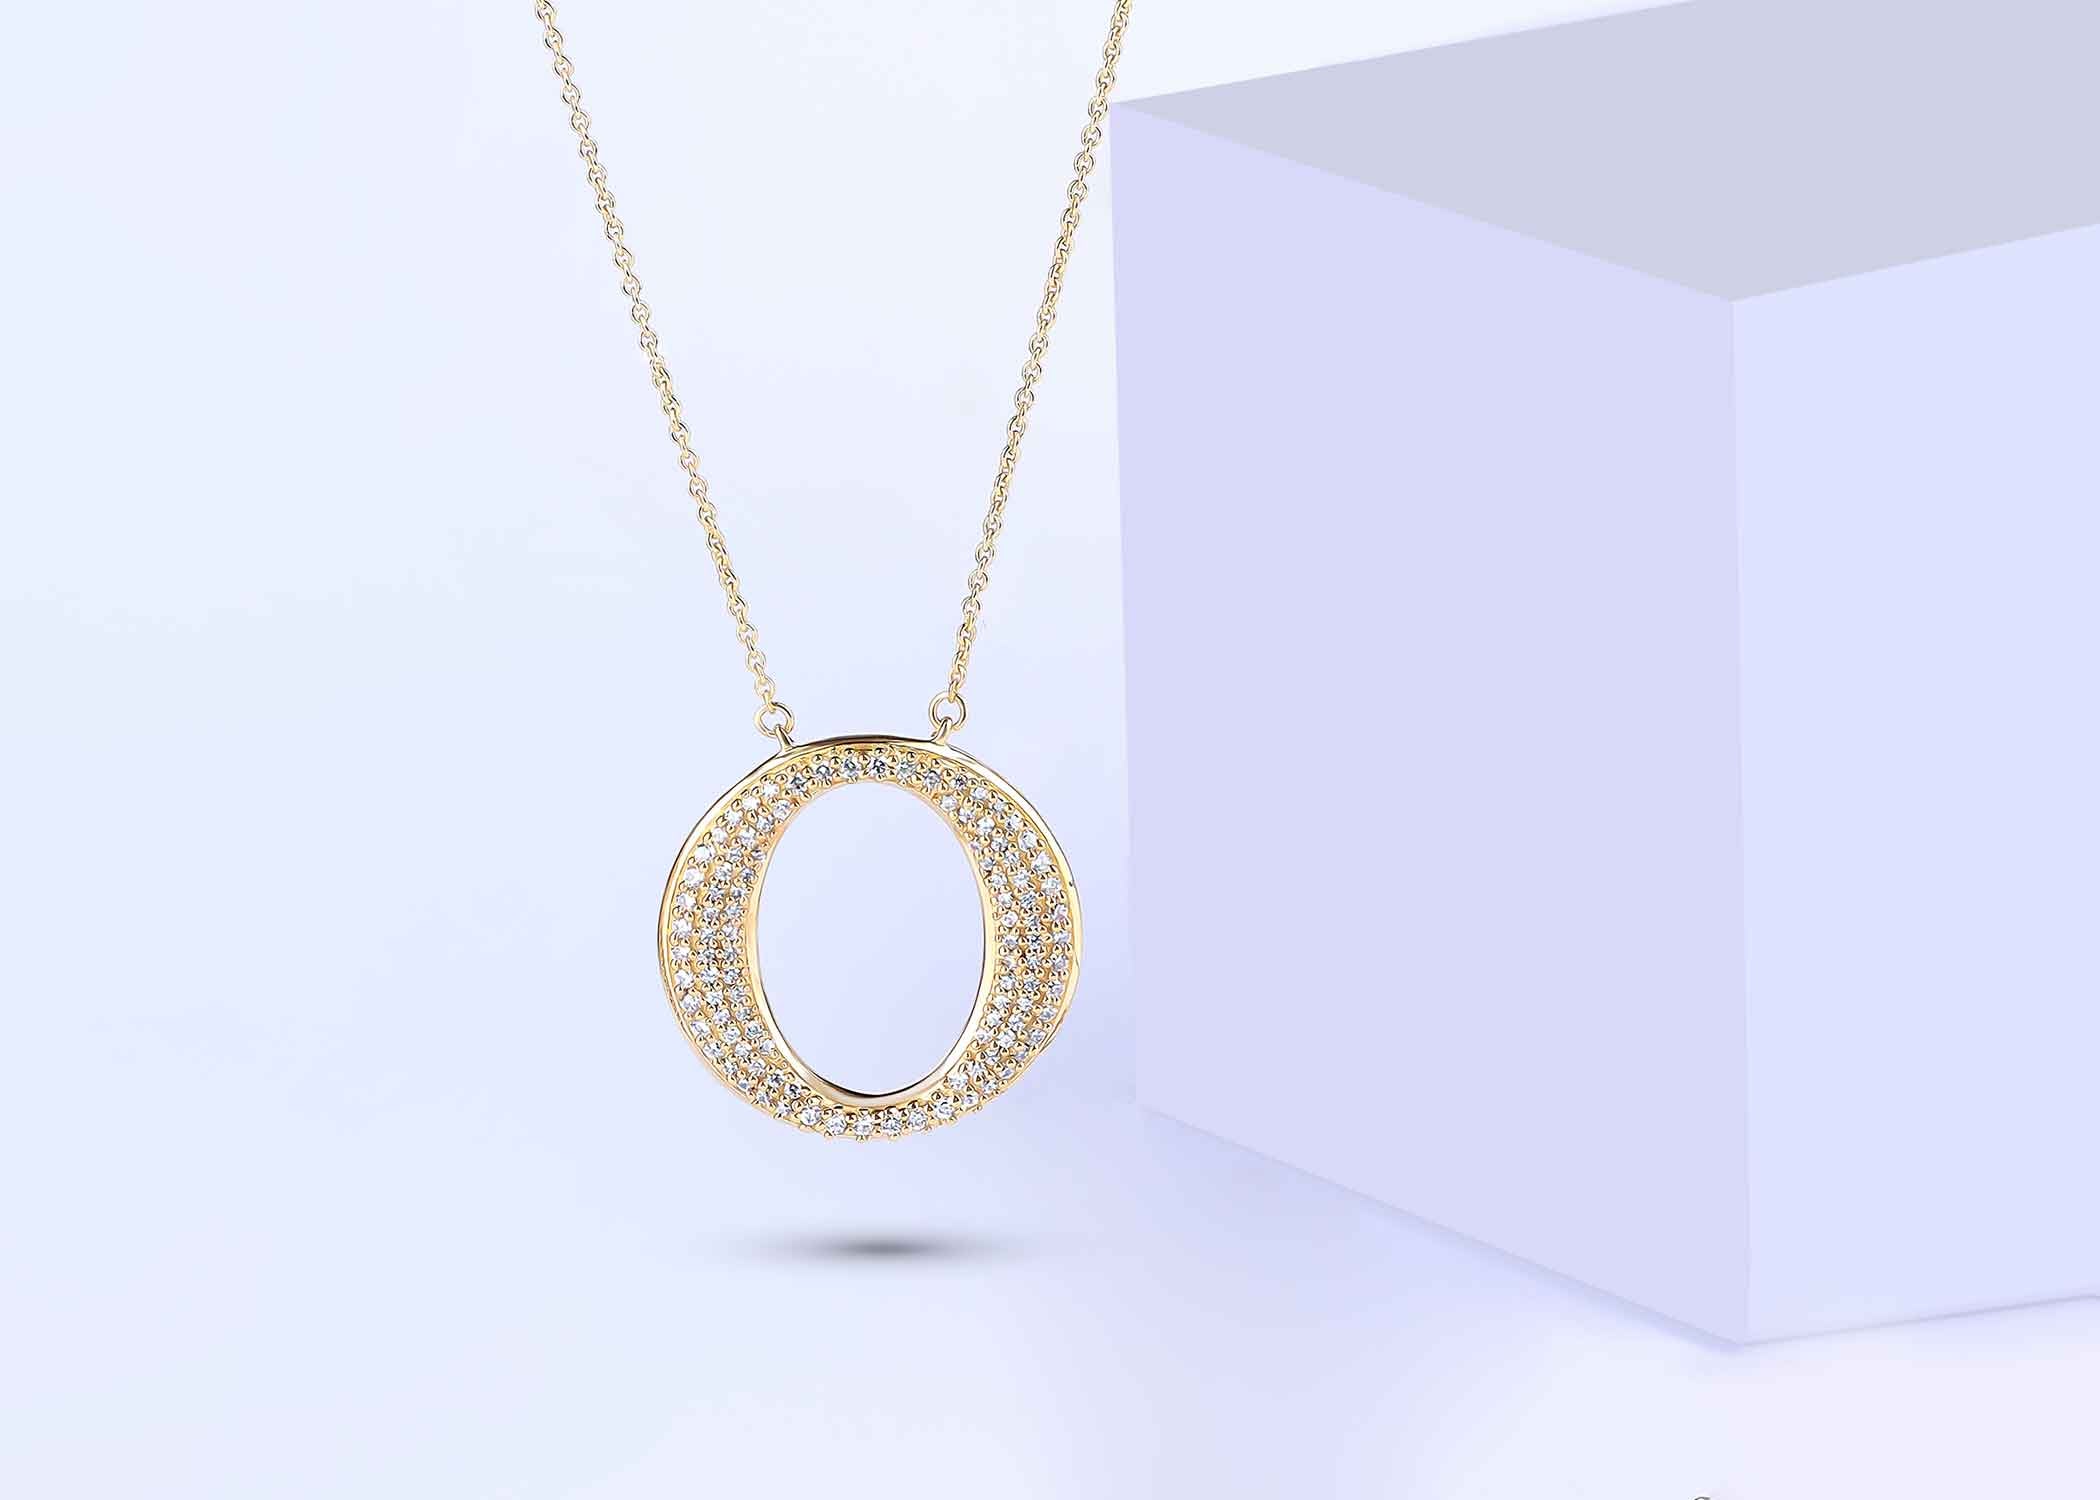 Tapering 3-Row Circular Silhouette Necklace - Necklace 